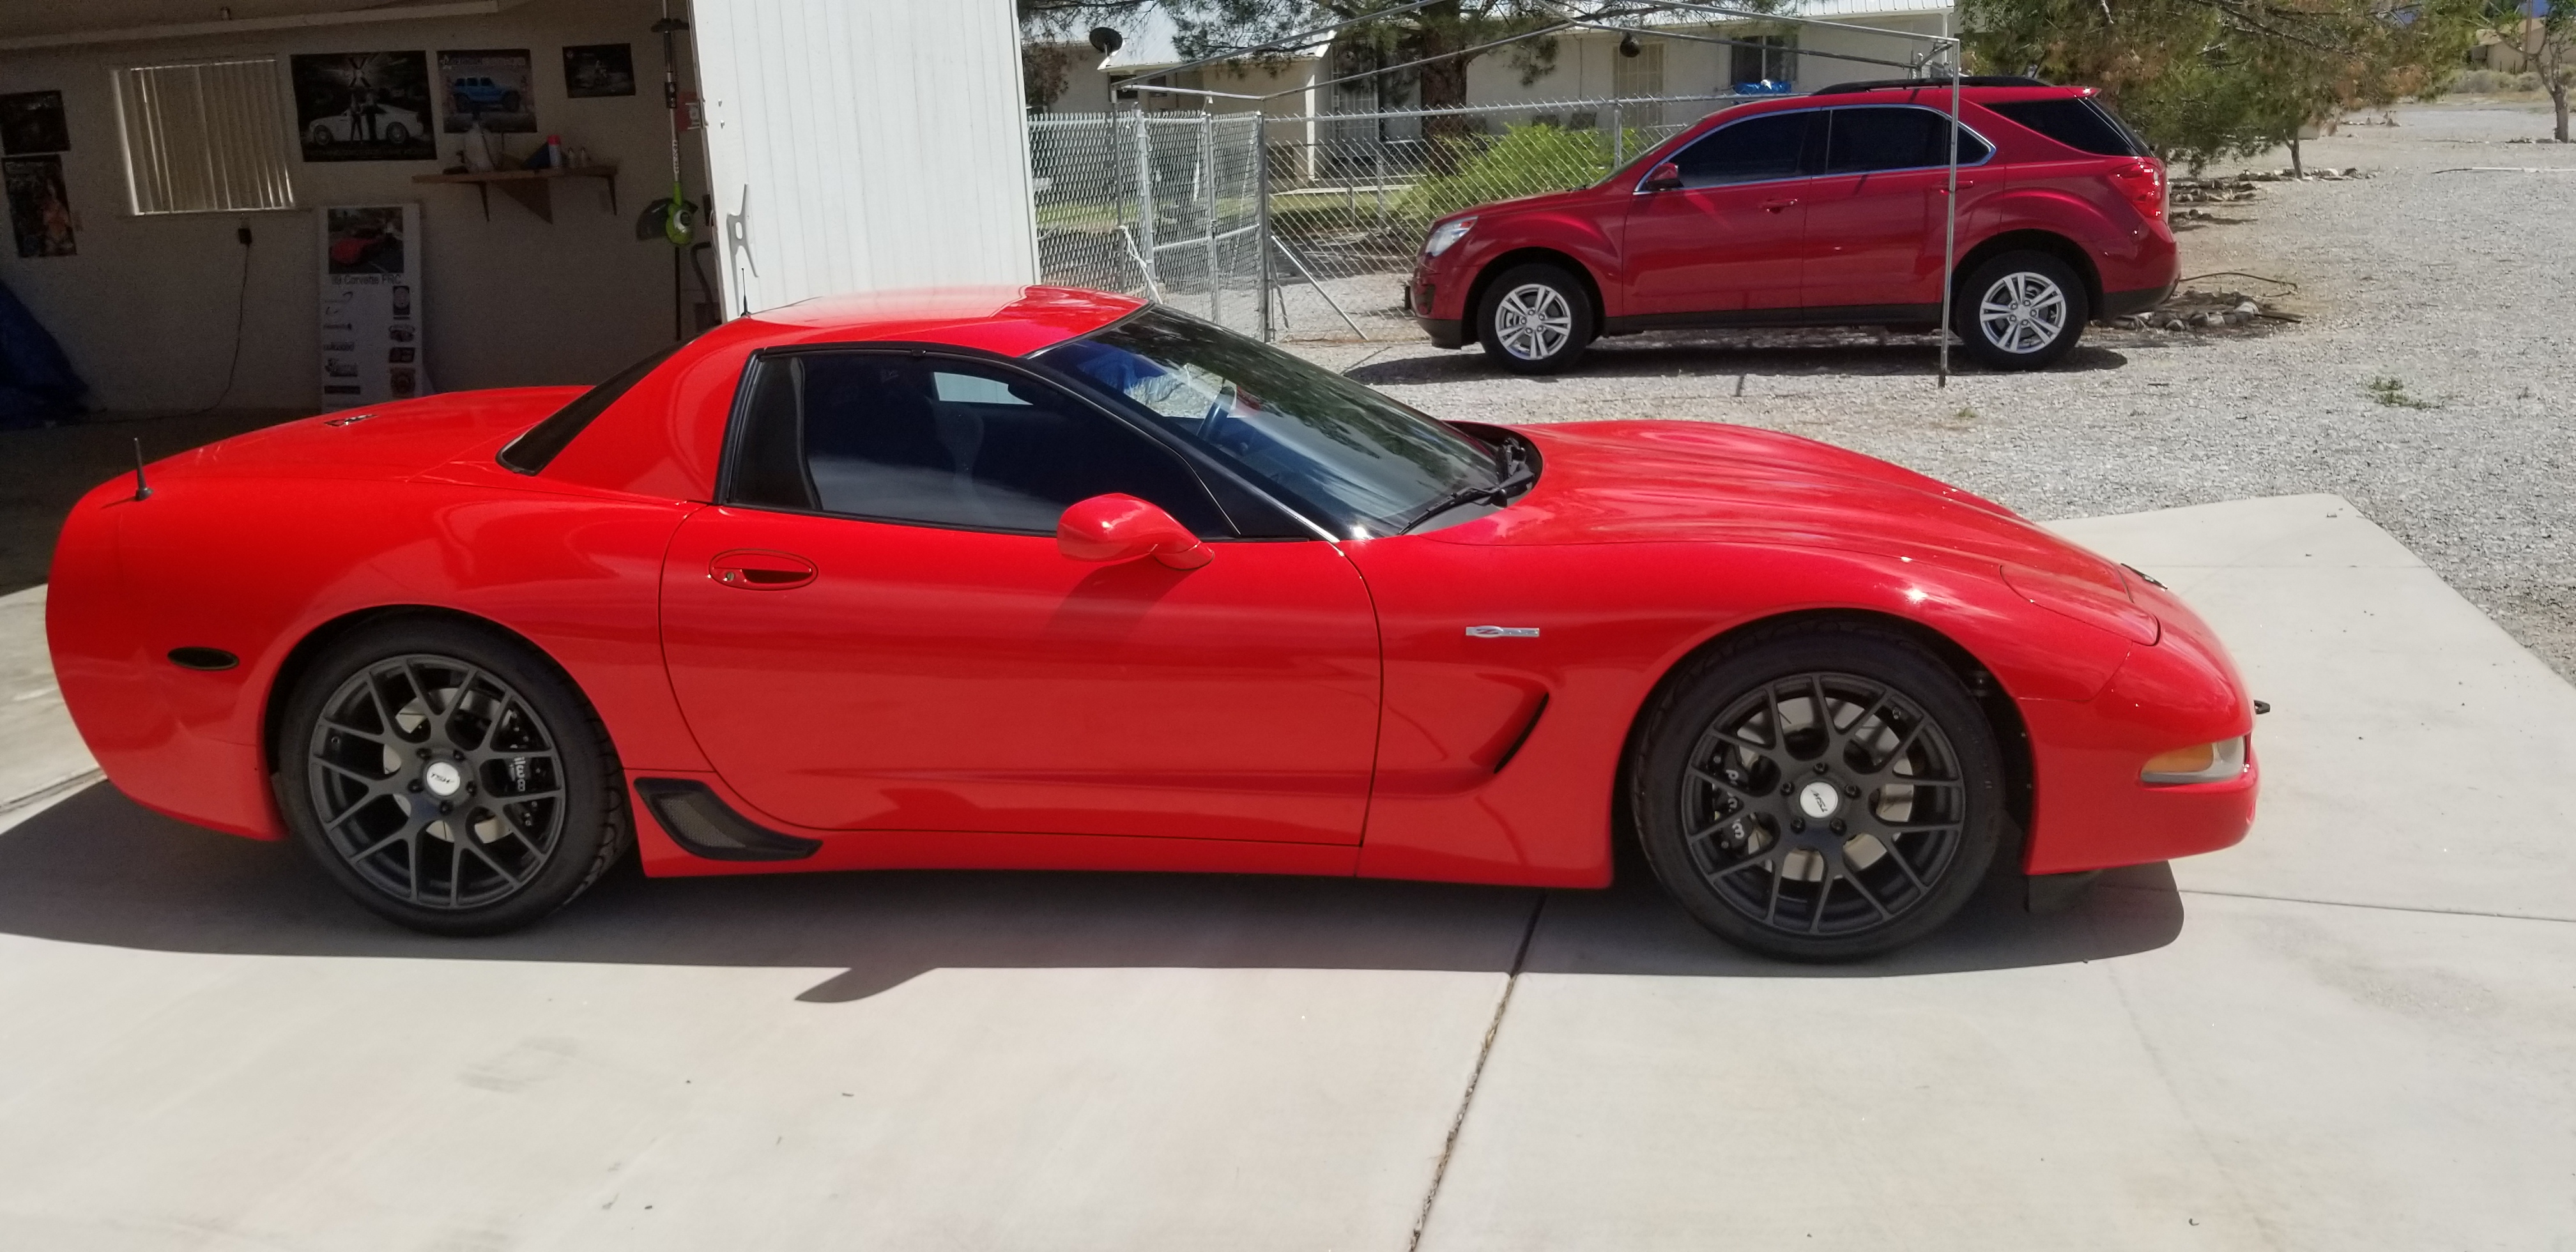 A red sports car parked in a driveway

Description automatically generated with medium confidence